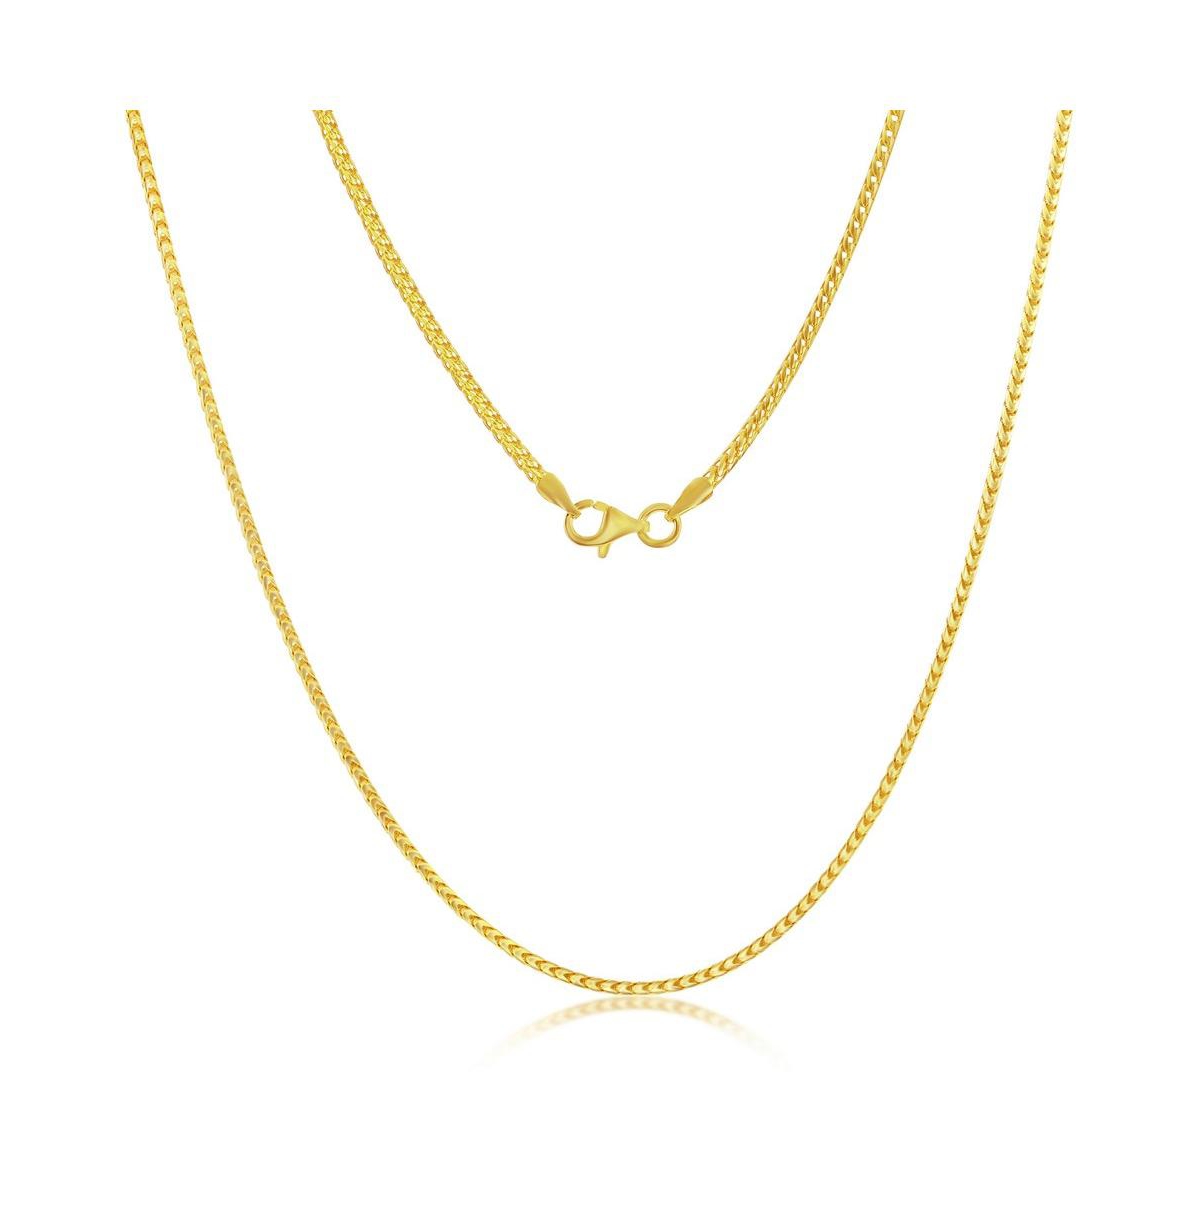 Franco Chain 1.5mm Sterling Silver or Gold Plated Over Sterling Silver 24" Necklace - Gold